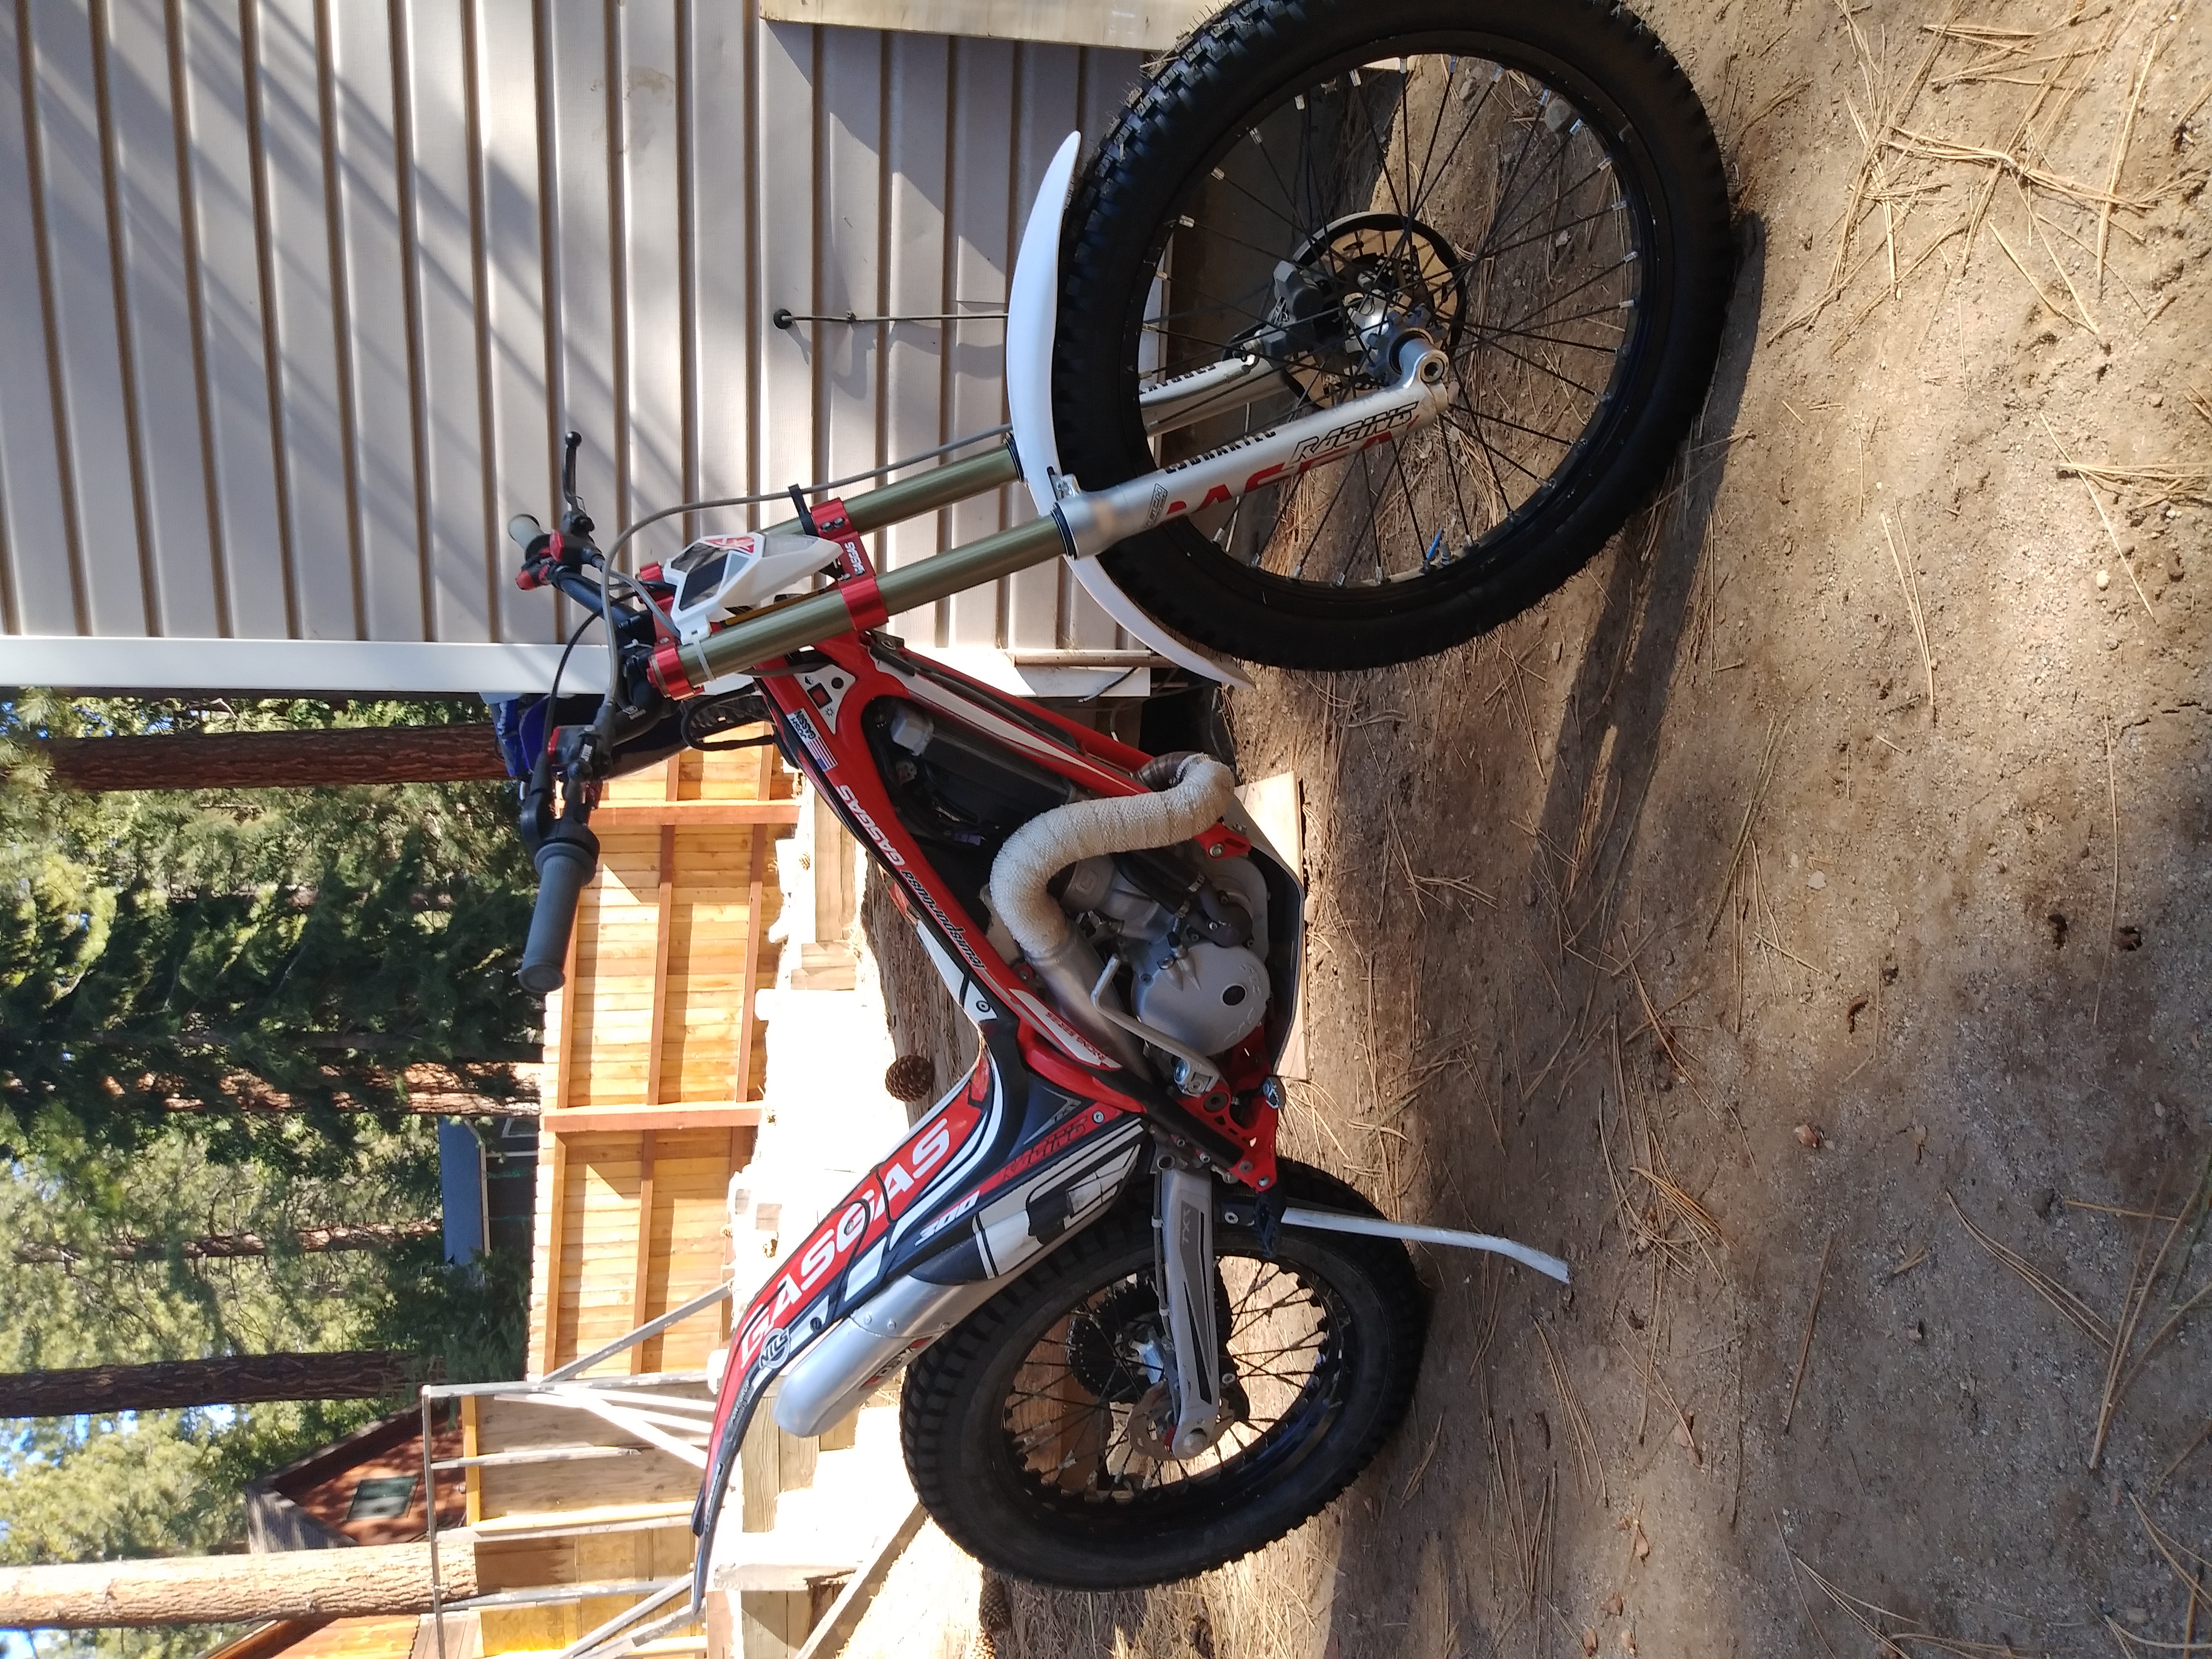 used trials motorcycle for sale